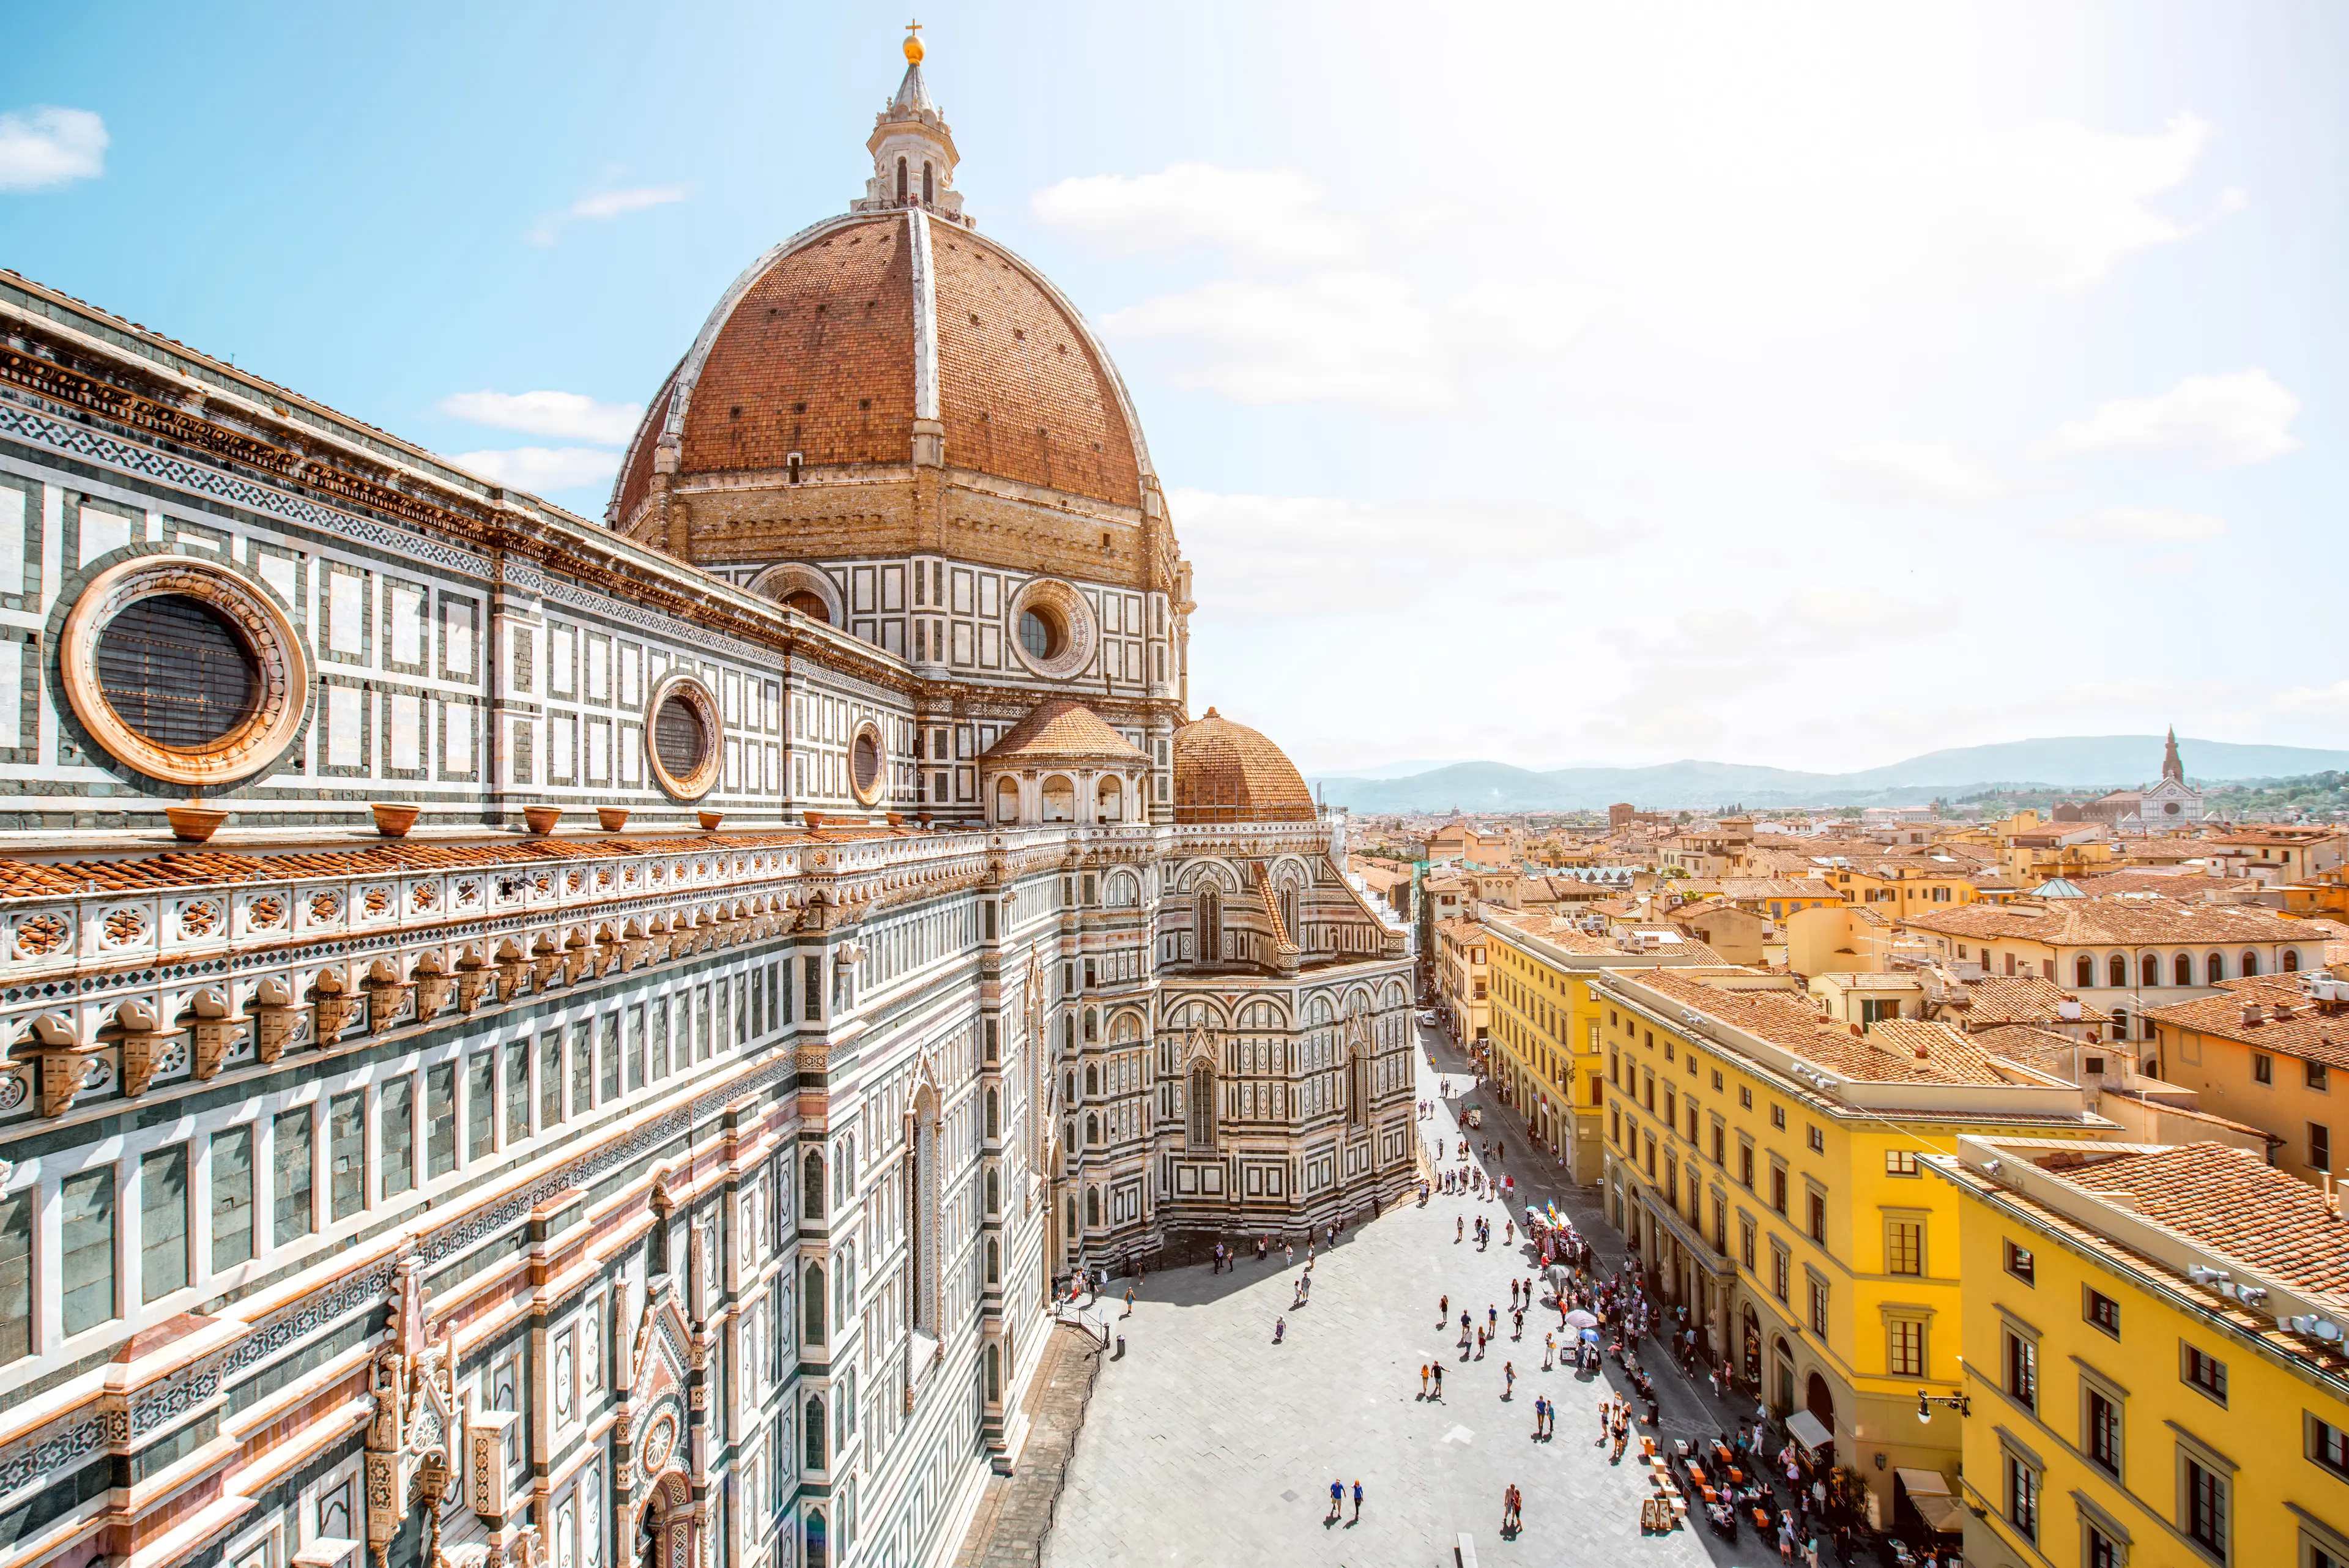 3-Day Locals' Experience in Florence: Sightseeing, Food, Wine, Shopping